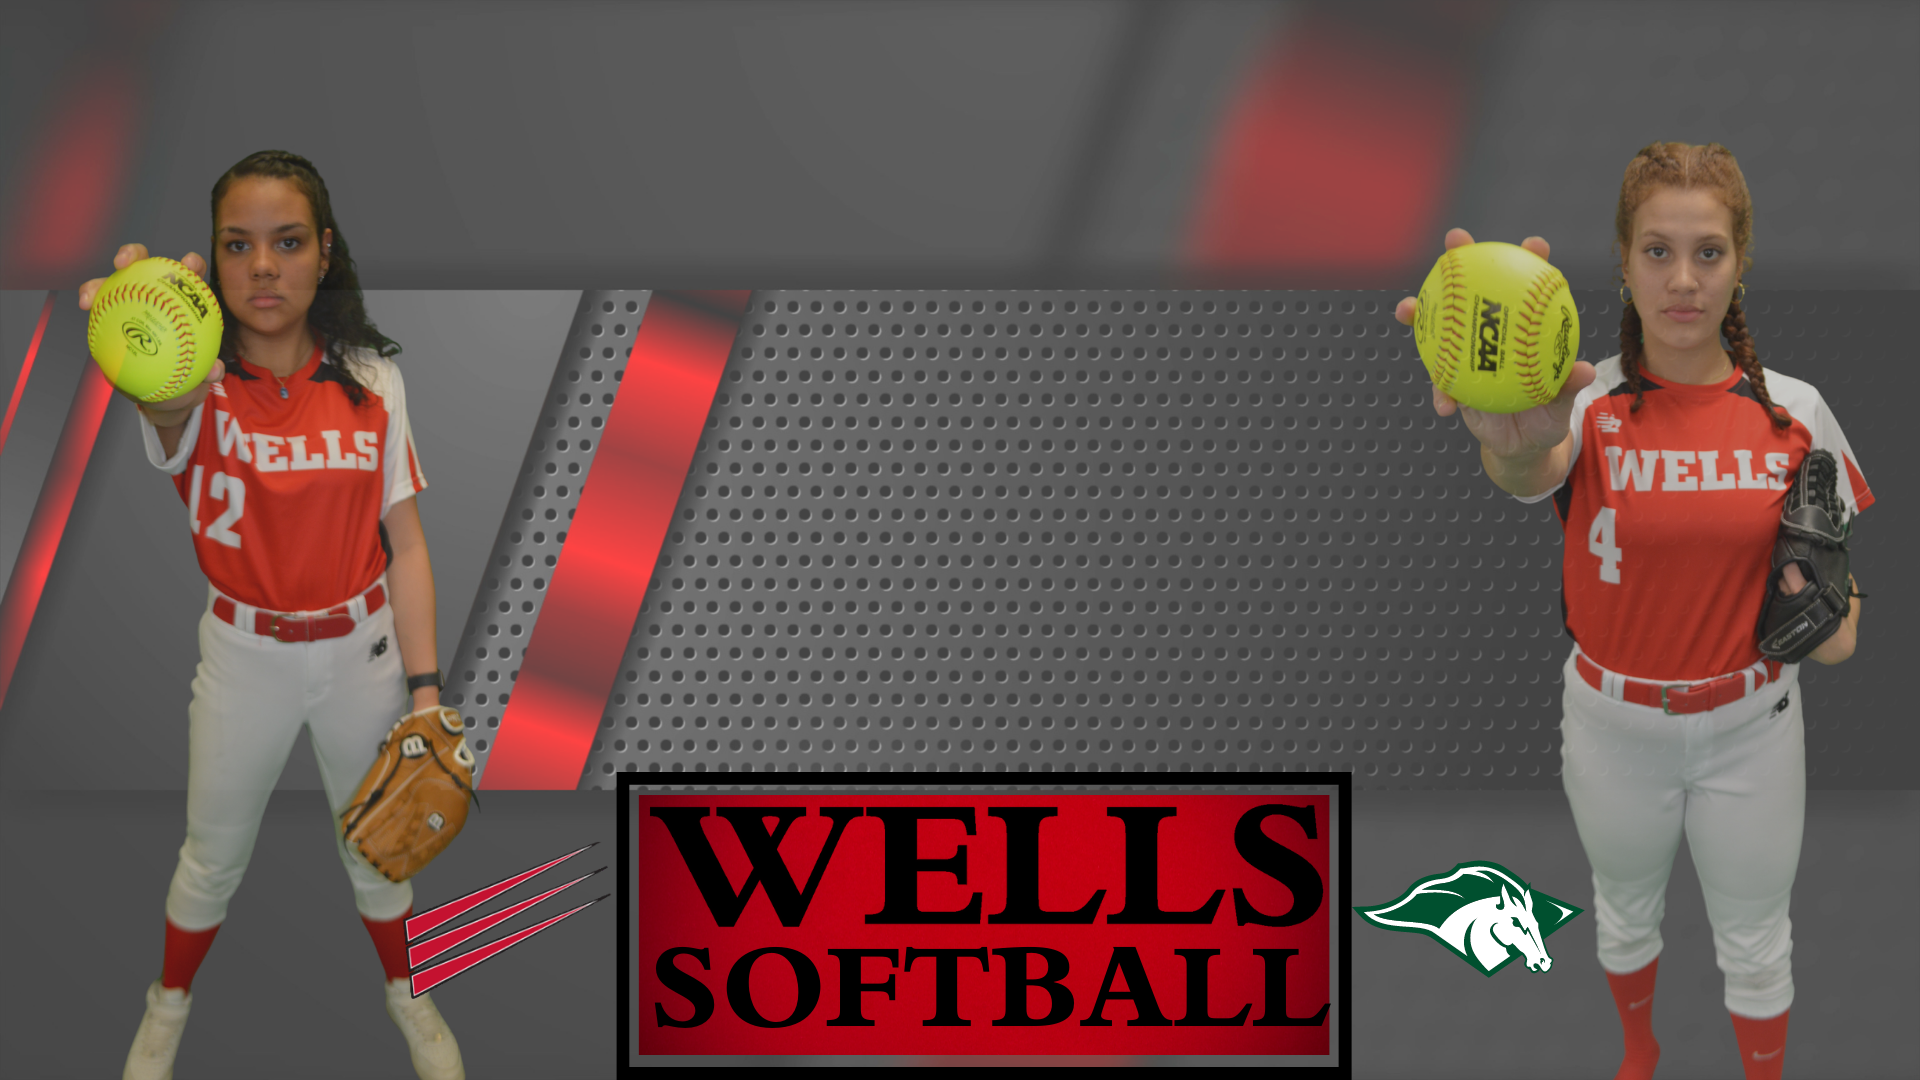 Express Softball travels to SUNY morrisville